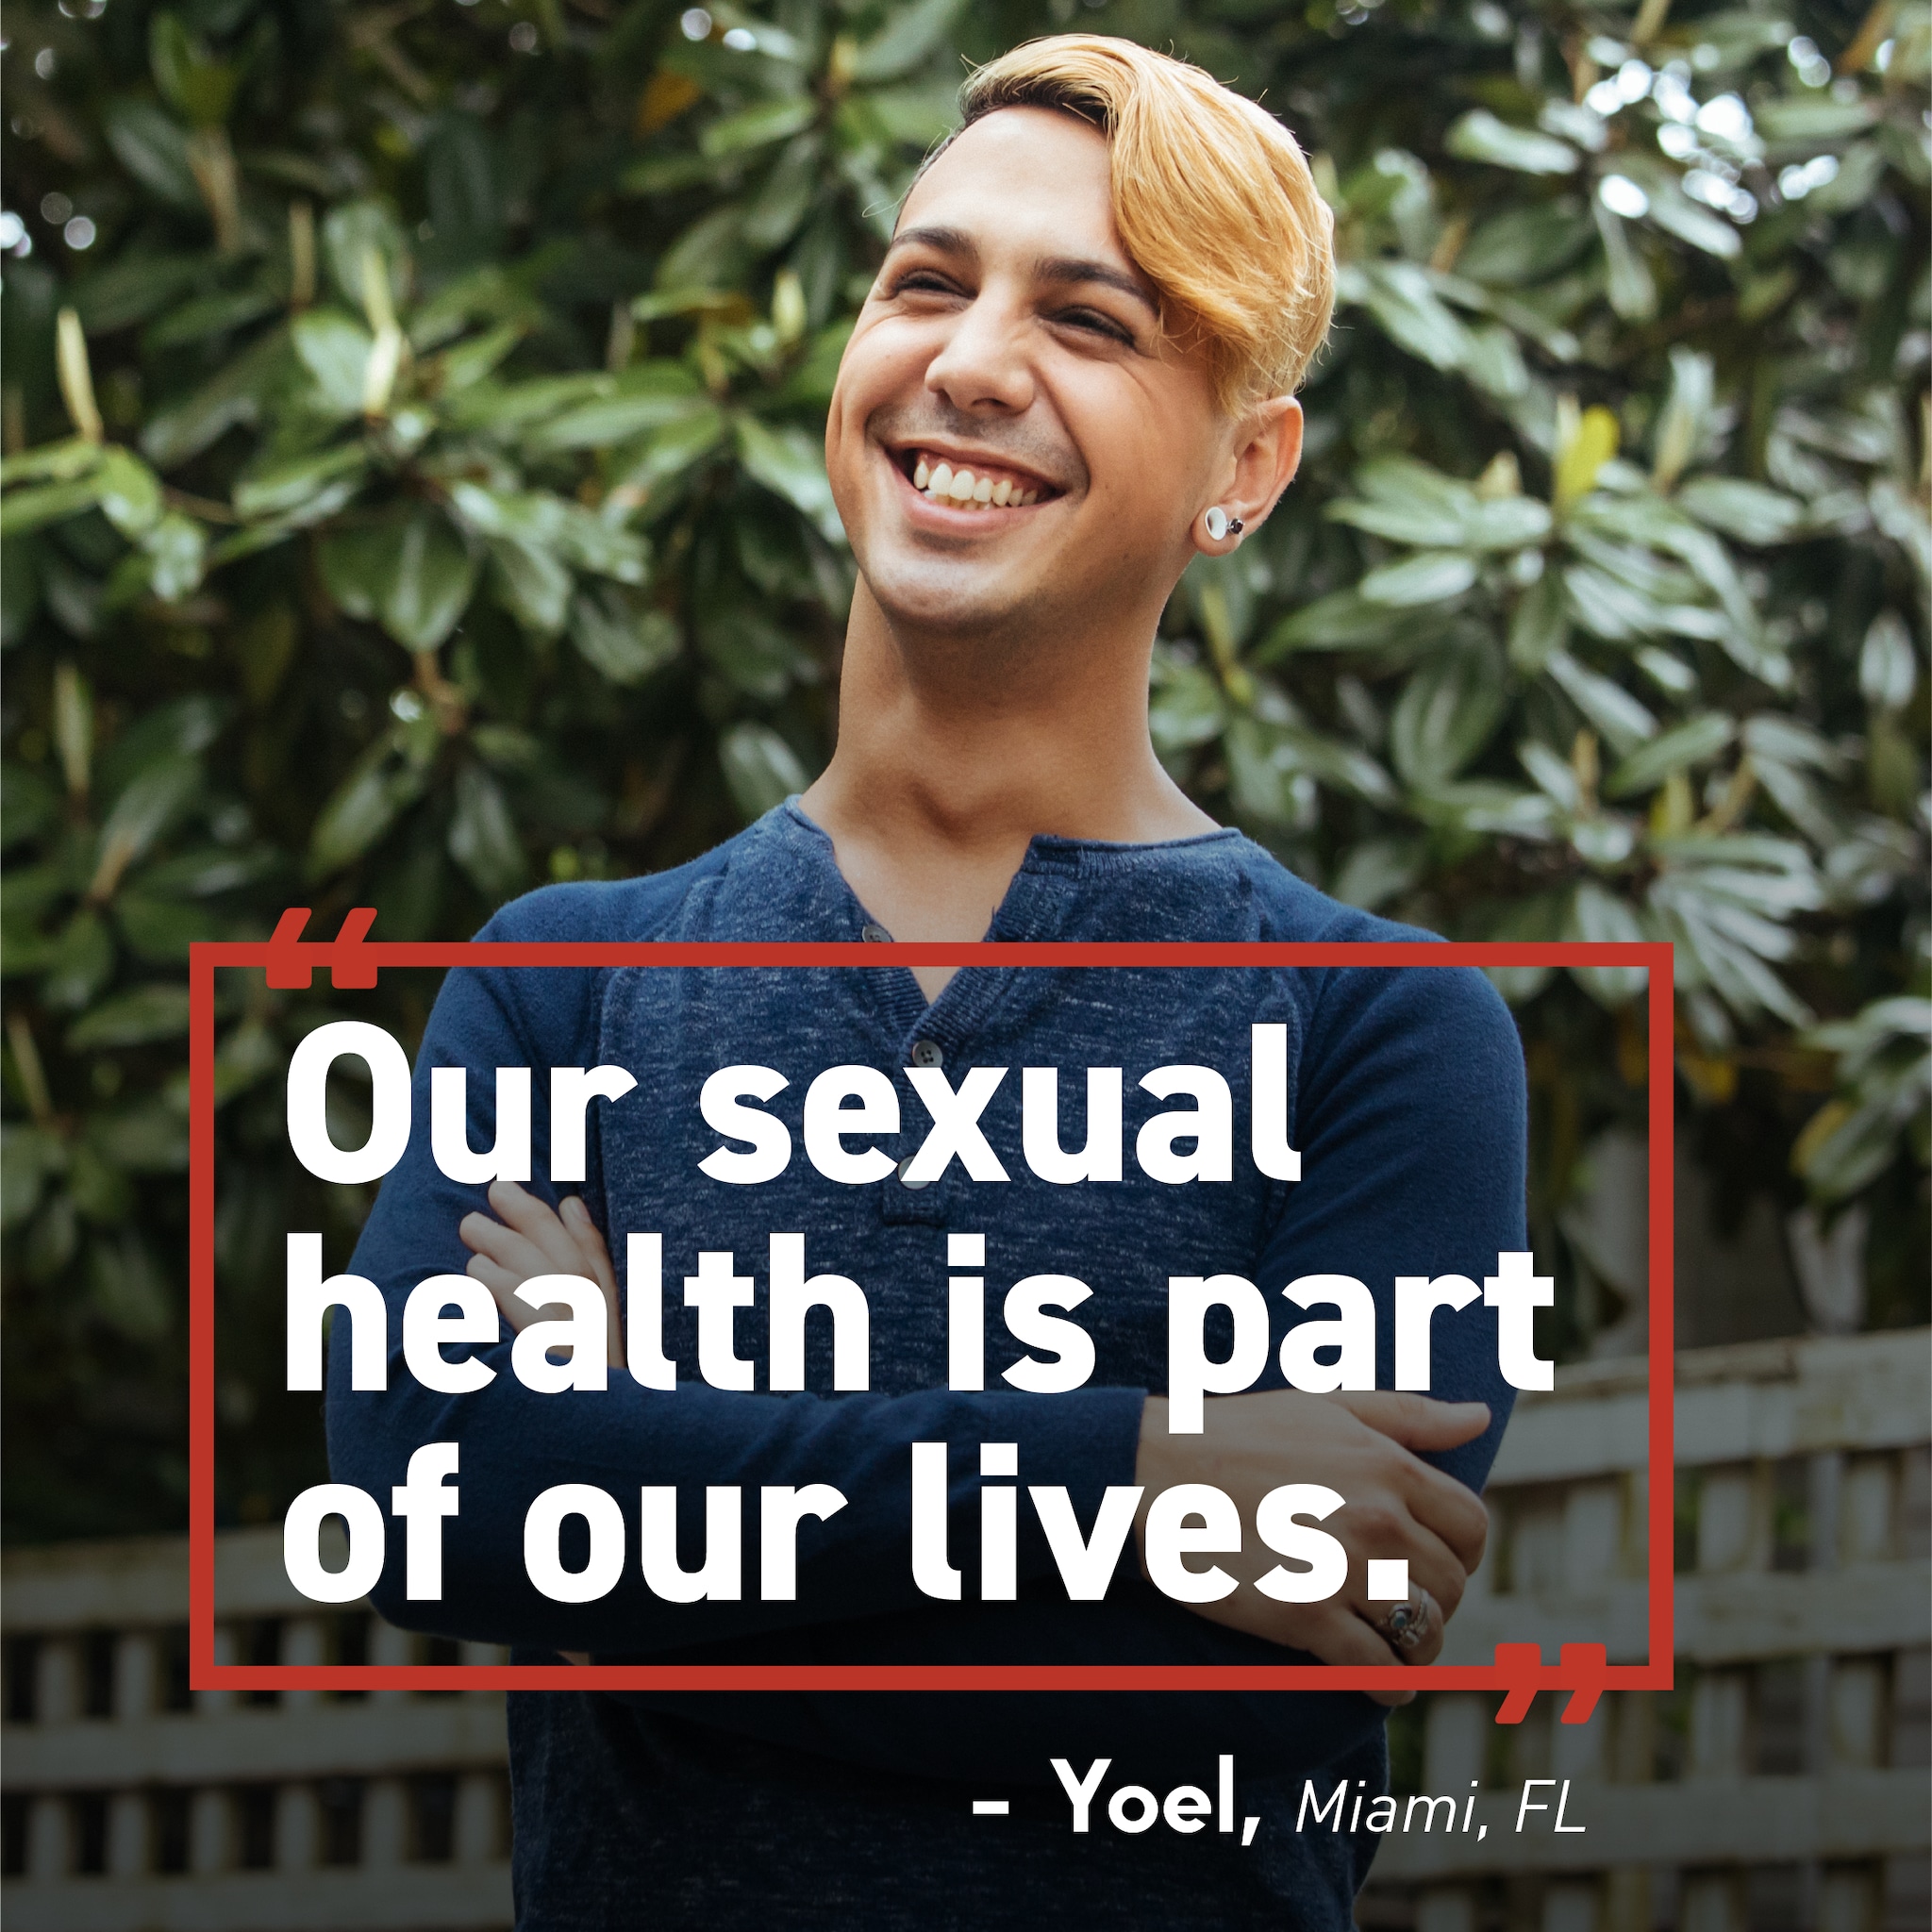 Image of a young man smiling outdoors. Text: “Our sexual health is part of our lives.” -Yoel, Miami, FL